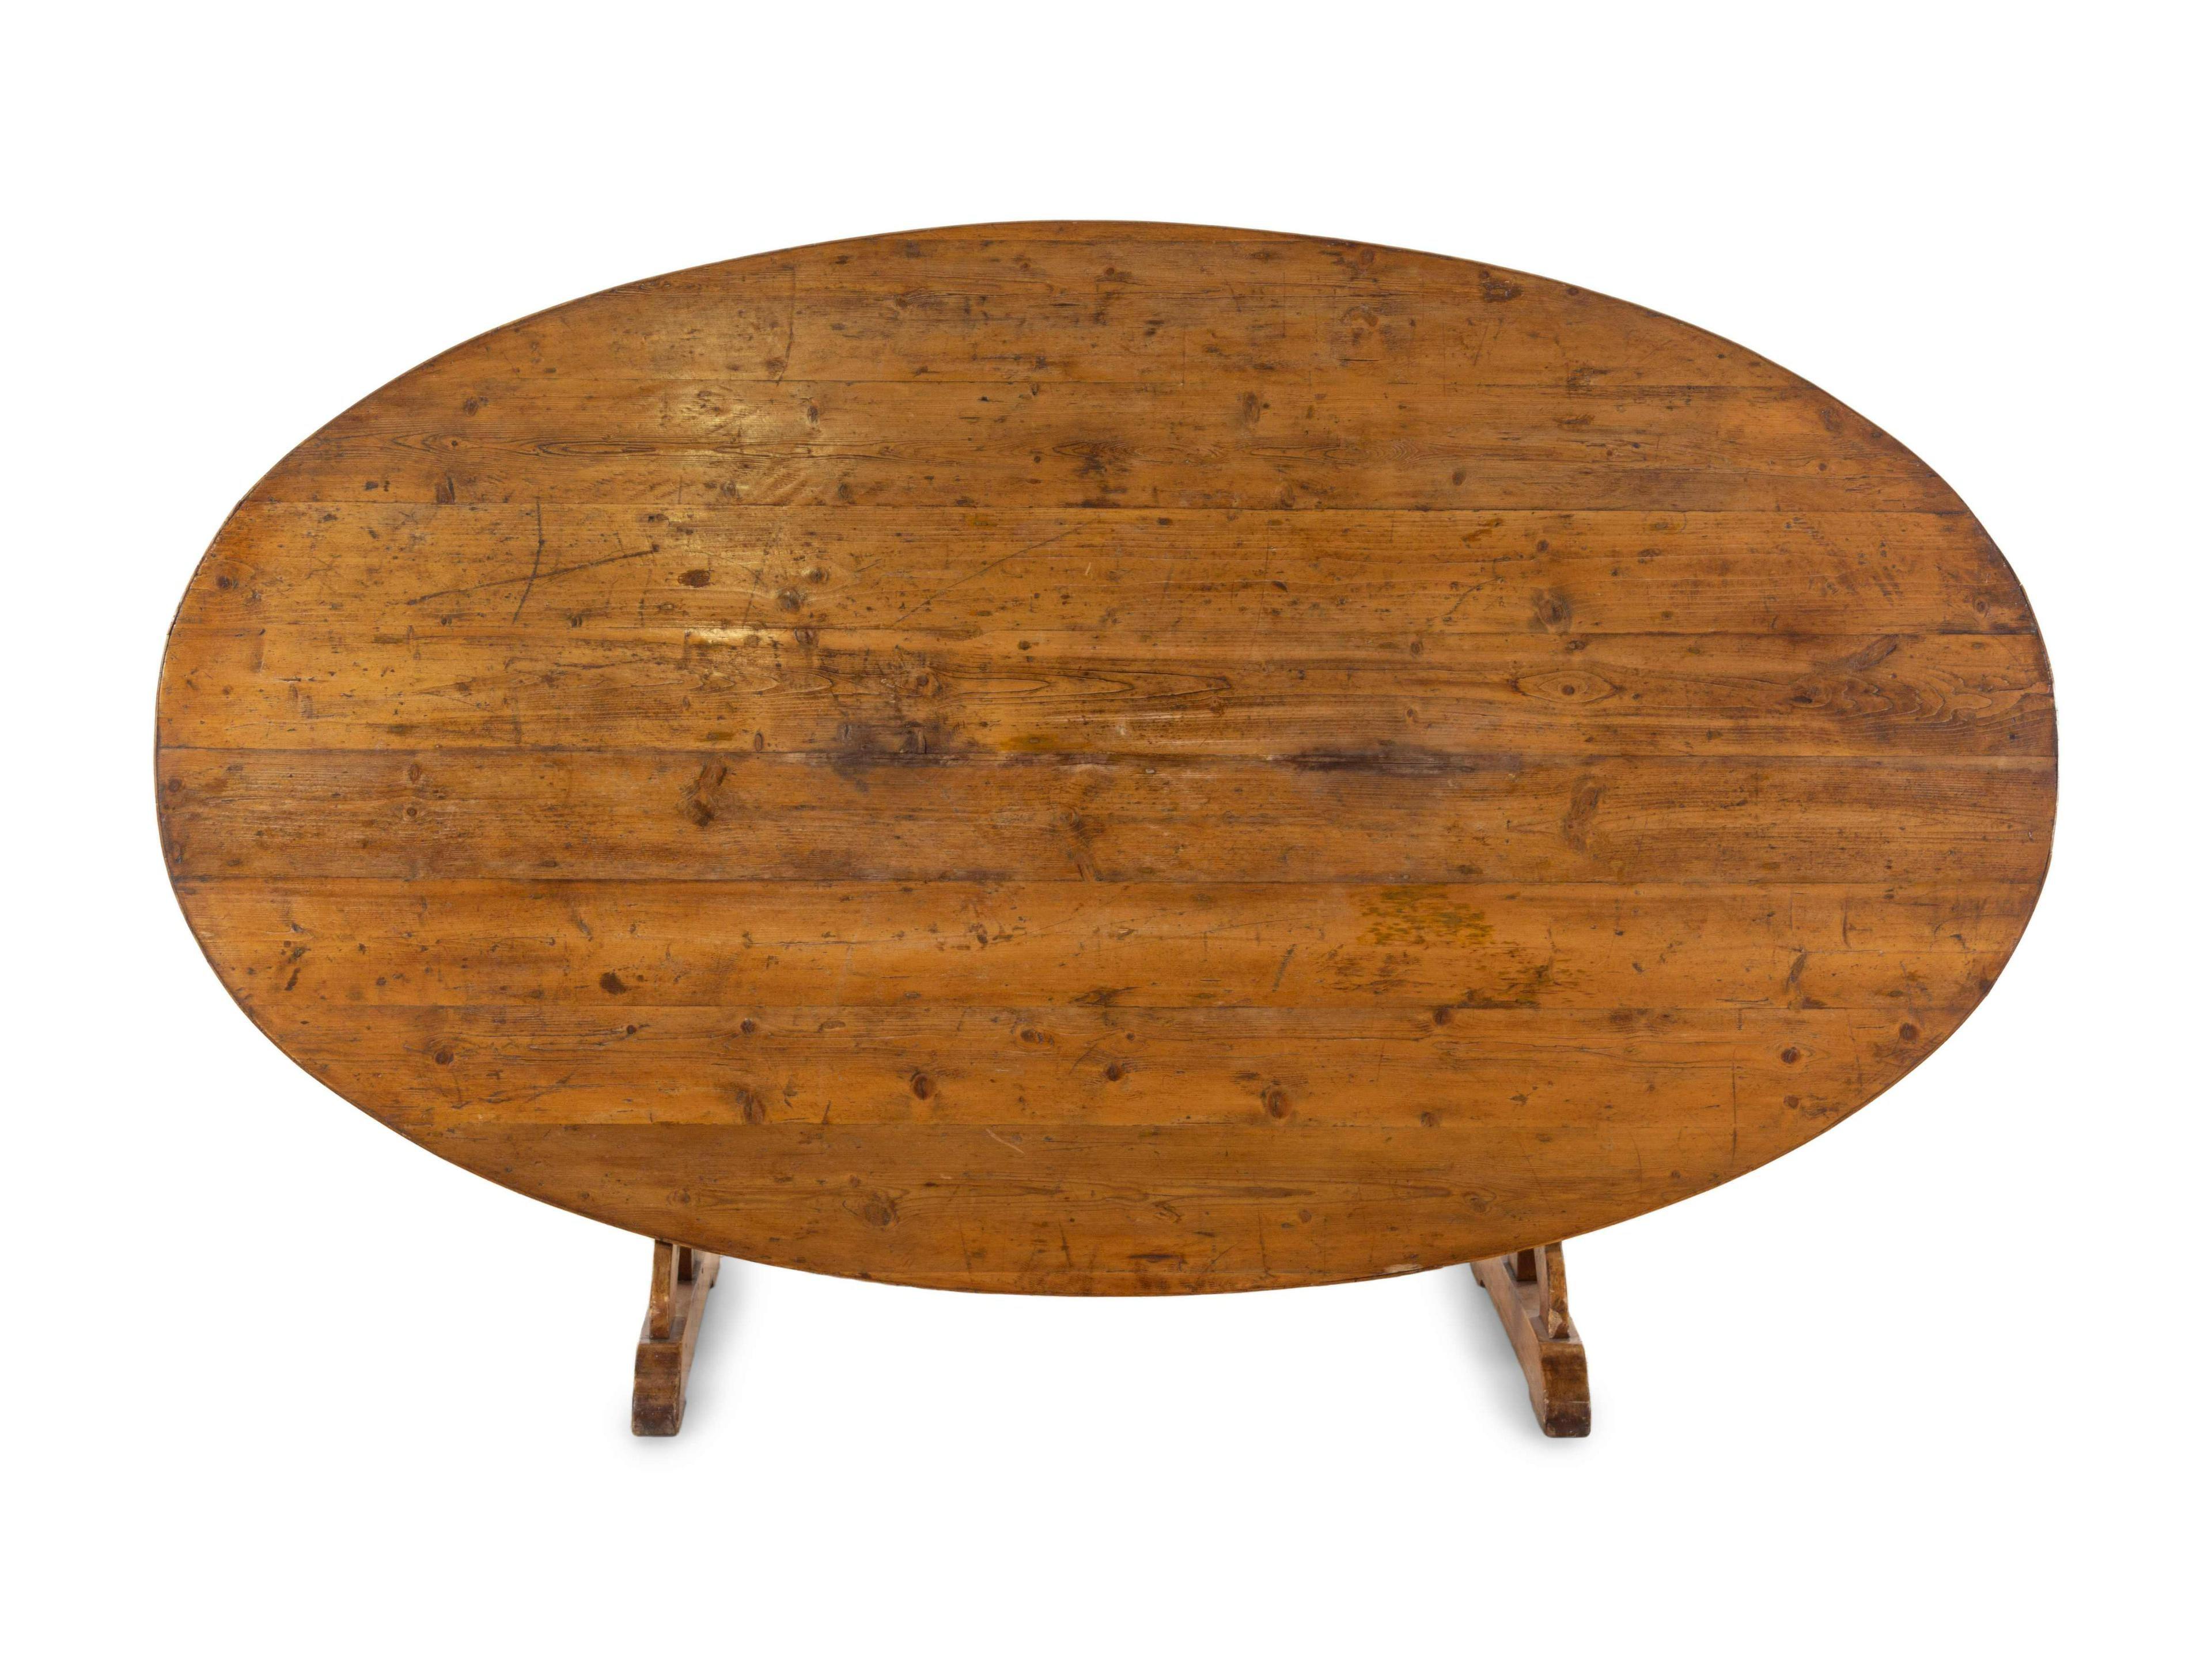 An unusually large oval wine tasting table in pine, circa 1850, French. The top tilts and is supported by a harp shaped brace that rotates. These were used in wine caves to entertain at a moment's notice.